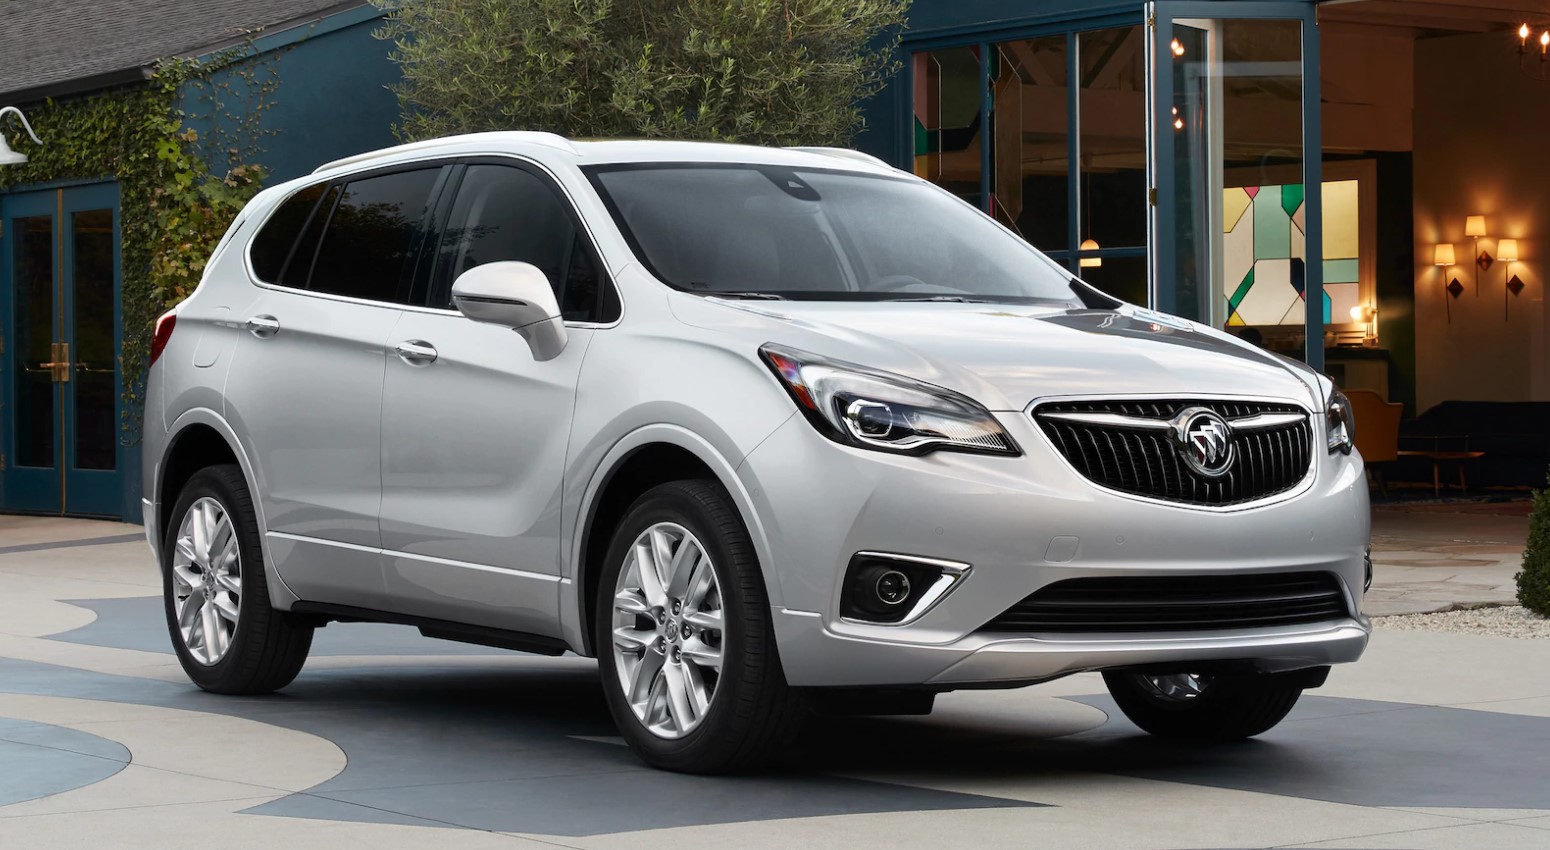 2019 Buick Envision Silver Exterior Front View Picture